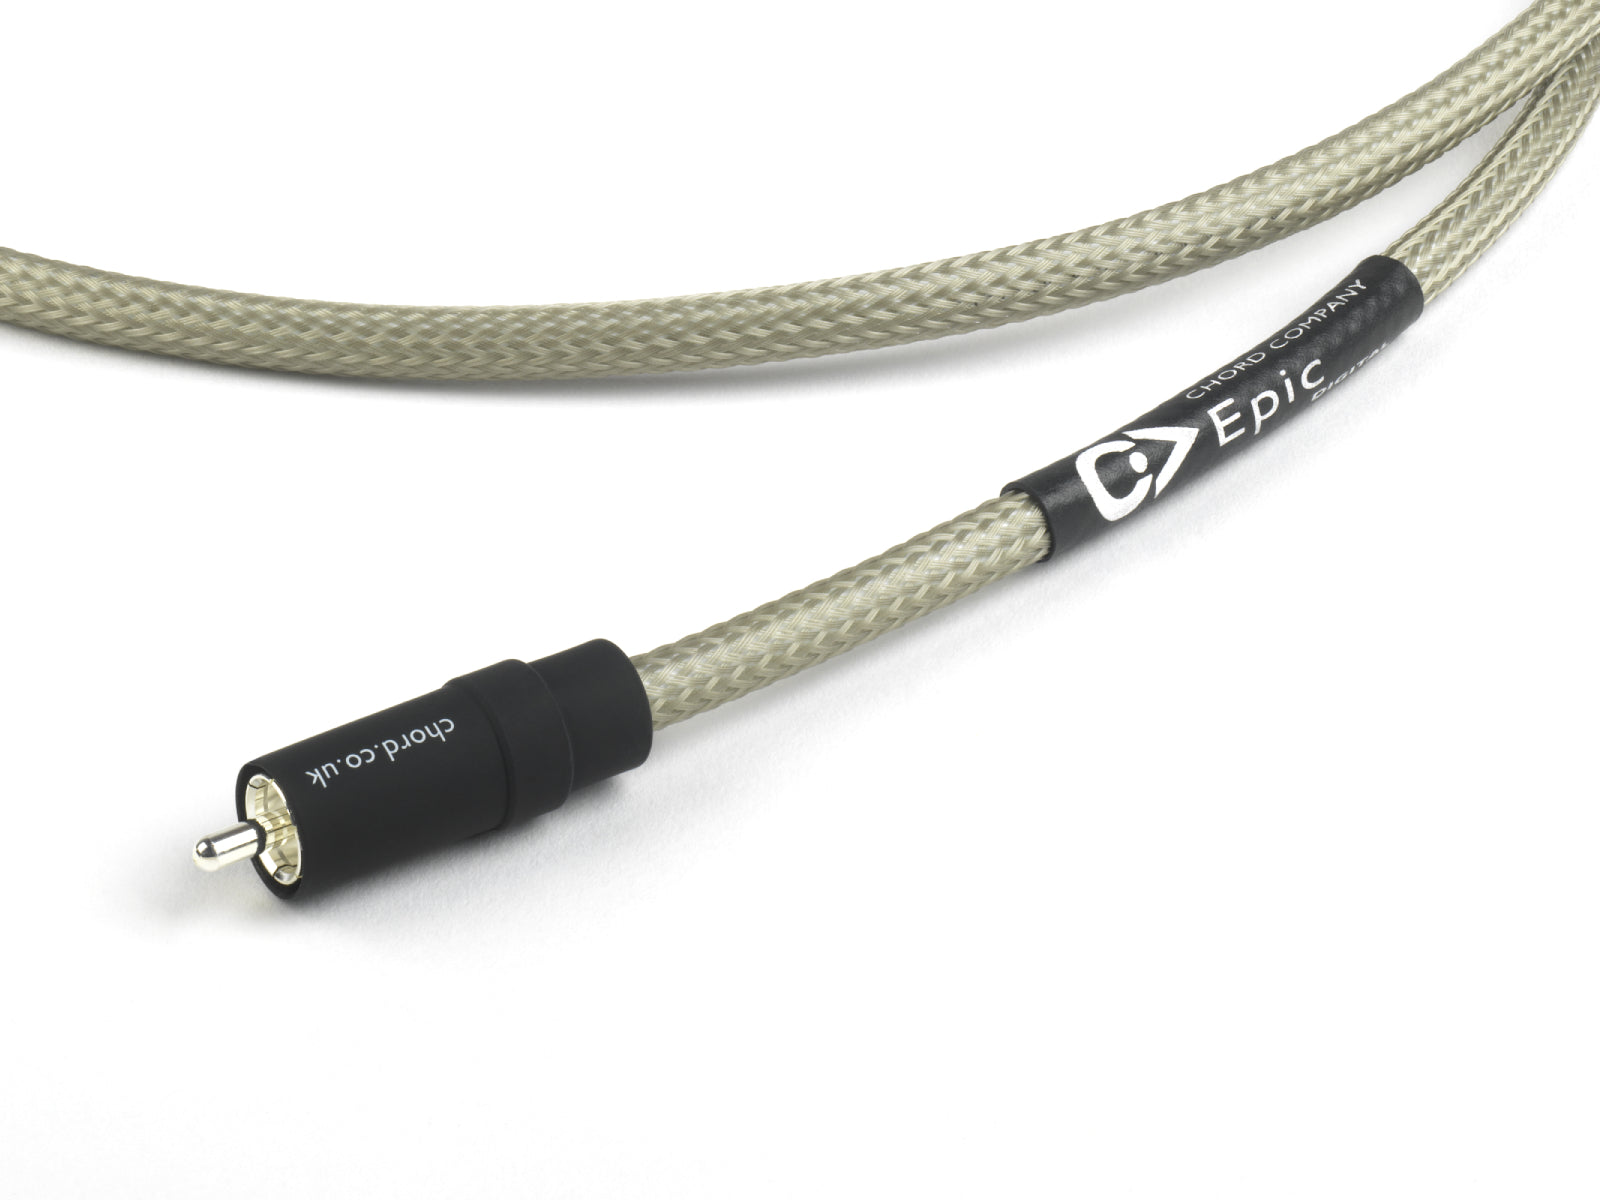 Chord Epic Digital RCA (ChorAlloy plated)